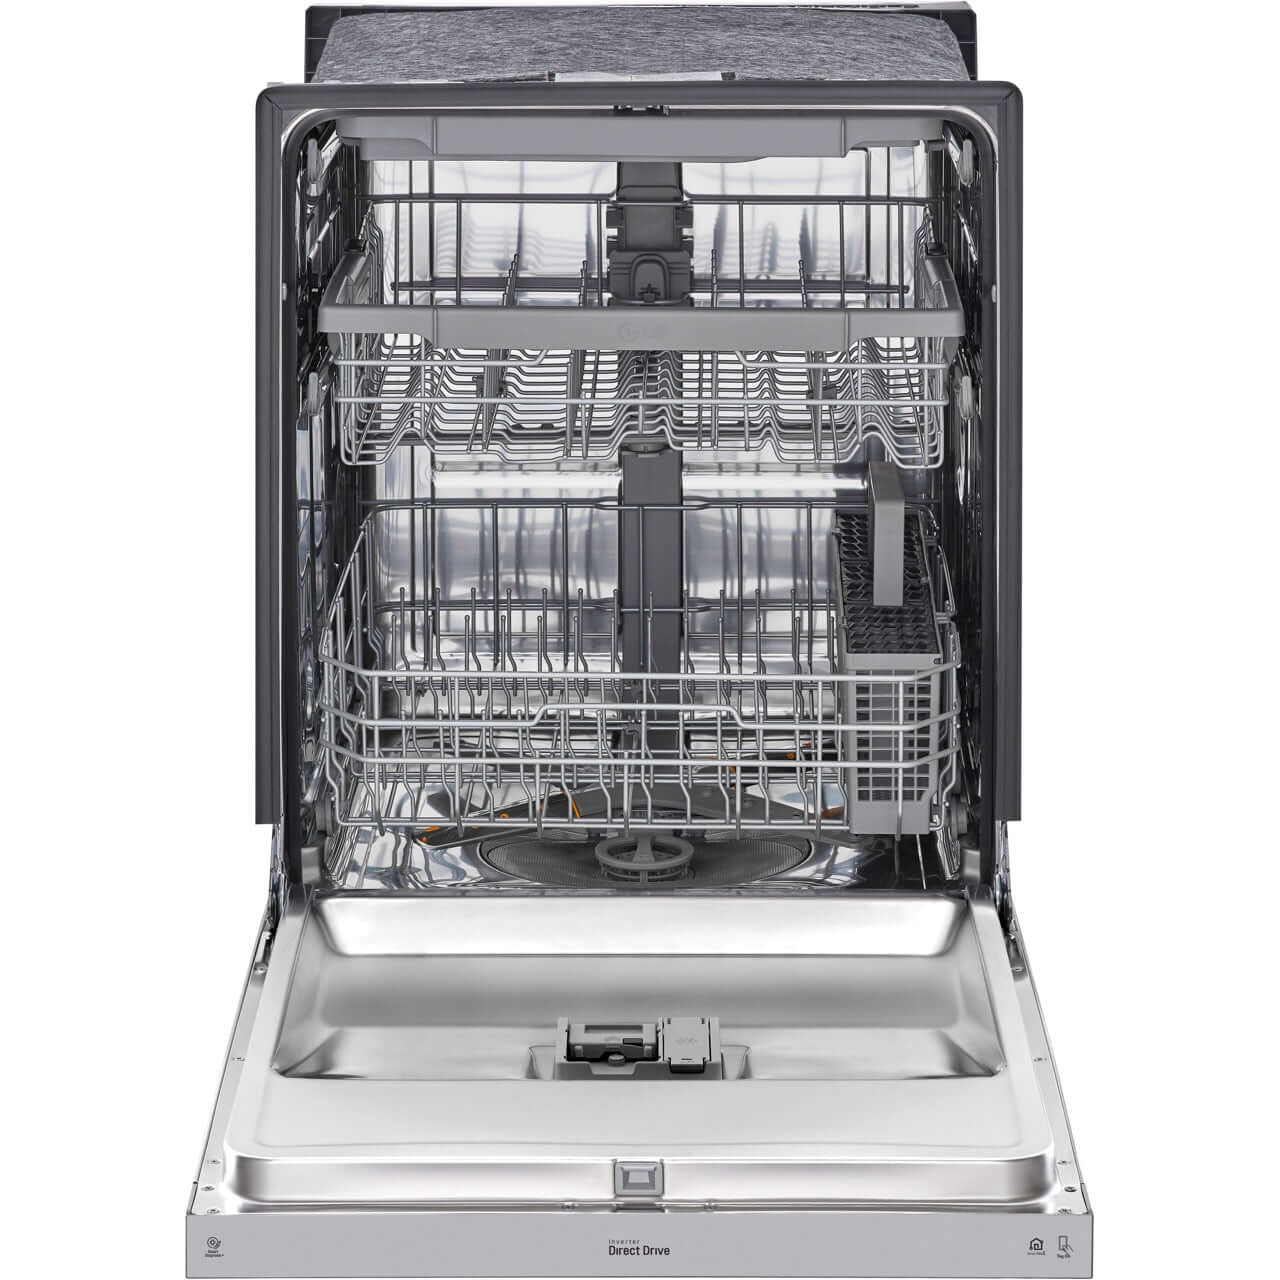 LG 24-Inch Front Control Dishwasher with QuadWash in Stainless Steel (LDFN4542S)